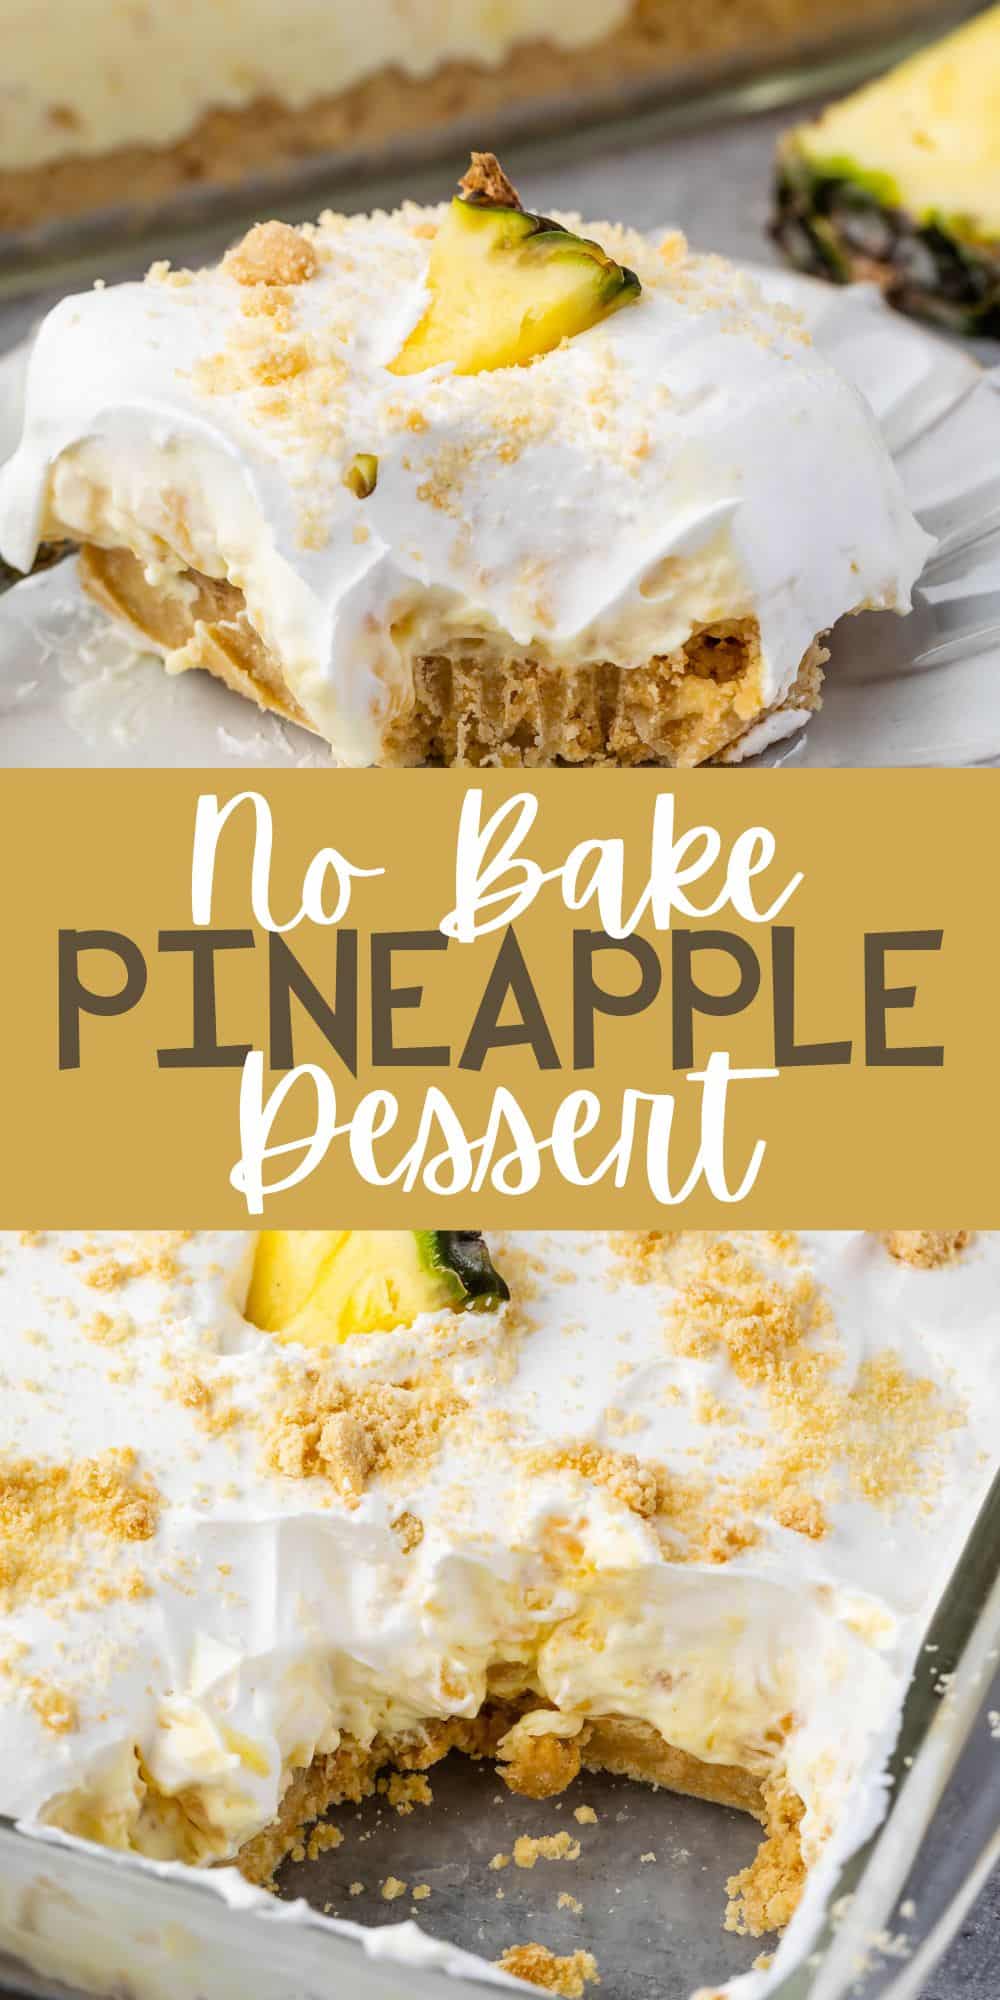 two photos of pineapple dessert with cool whip and a pineapple slice on top with words on the image.